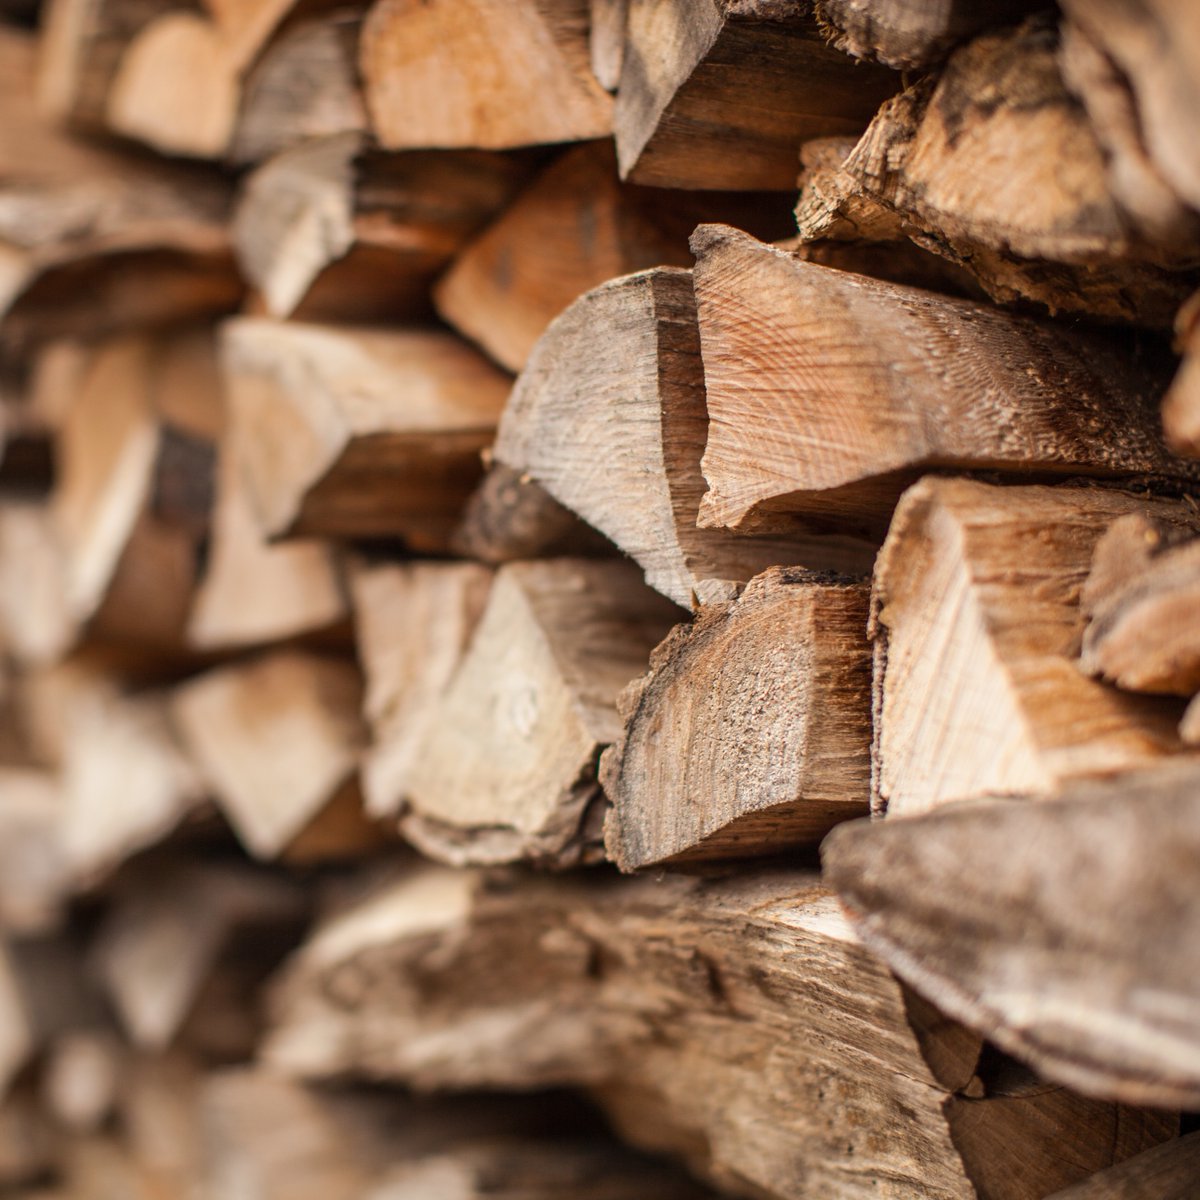 Cooler weather is on the way. How about some seasoned #firewood? We've got plenty of it. Stop by the Garden Center and purchase by the piece or the tote! Remember to support your local business' this holiday season. loom.ly/JUoMhPY Come see us! #elmgrens #firewood